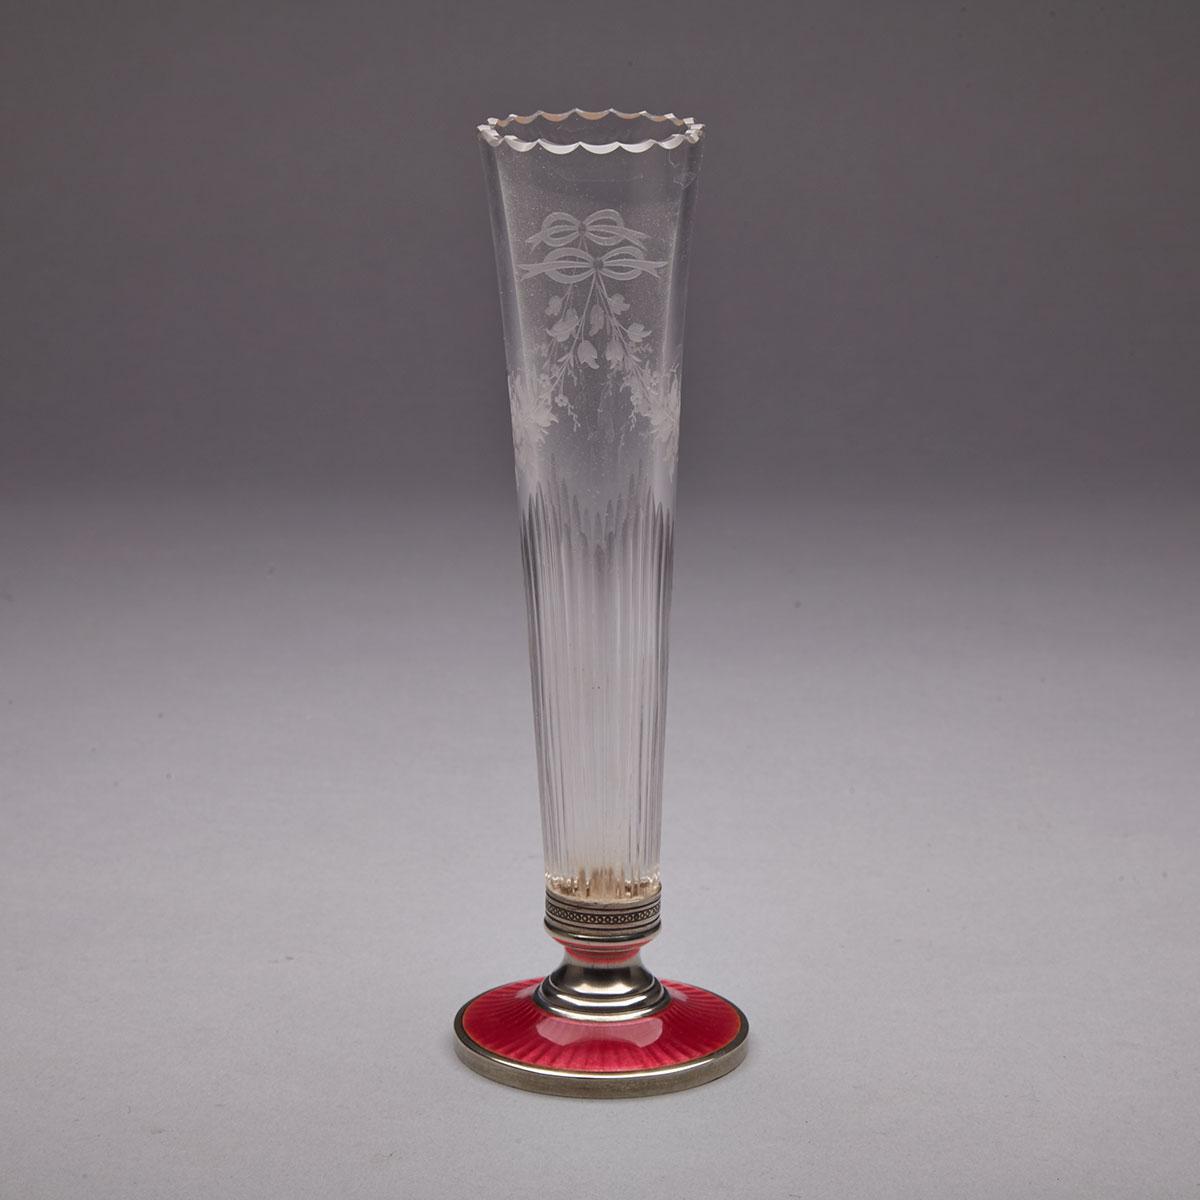 French Silver and Rose Guilloche Enamel Mounted Cut and Etched Glass Vase, Dreyfous, Paris, early 20th century